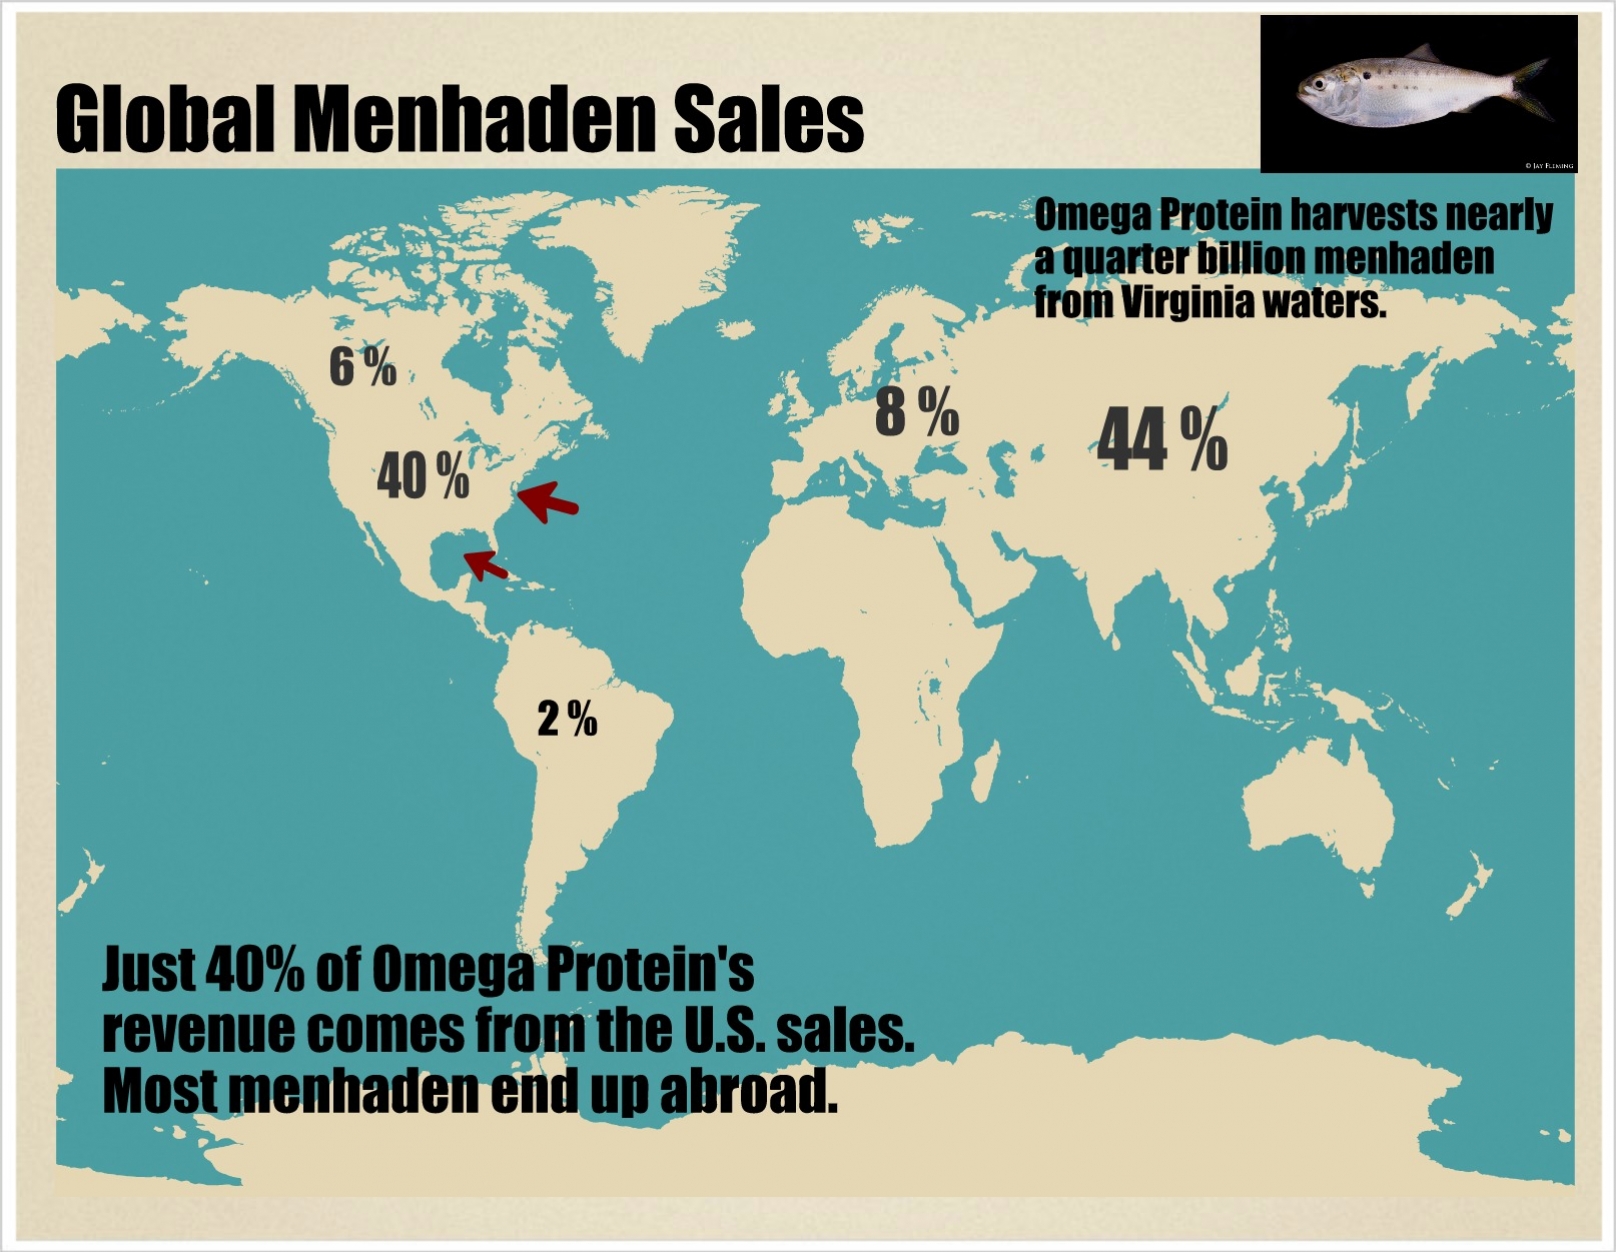 What Do Fertiliser, Omega-3 Pills And Pig Feed Have In Common? A Fish